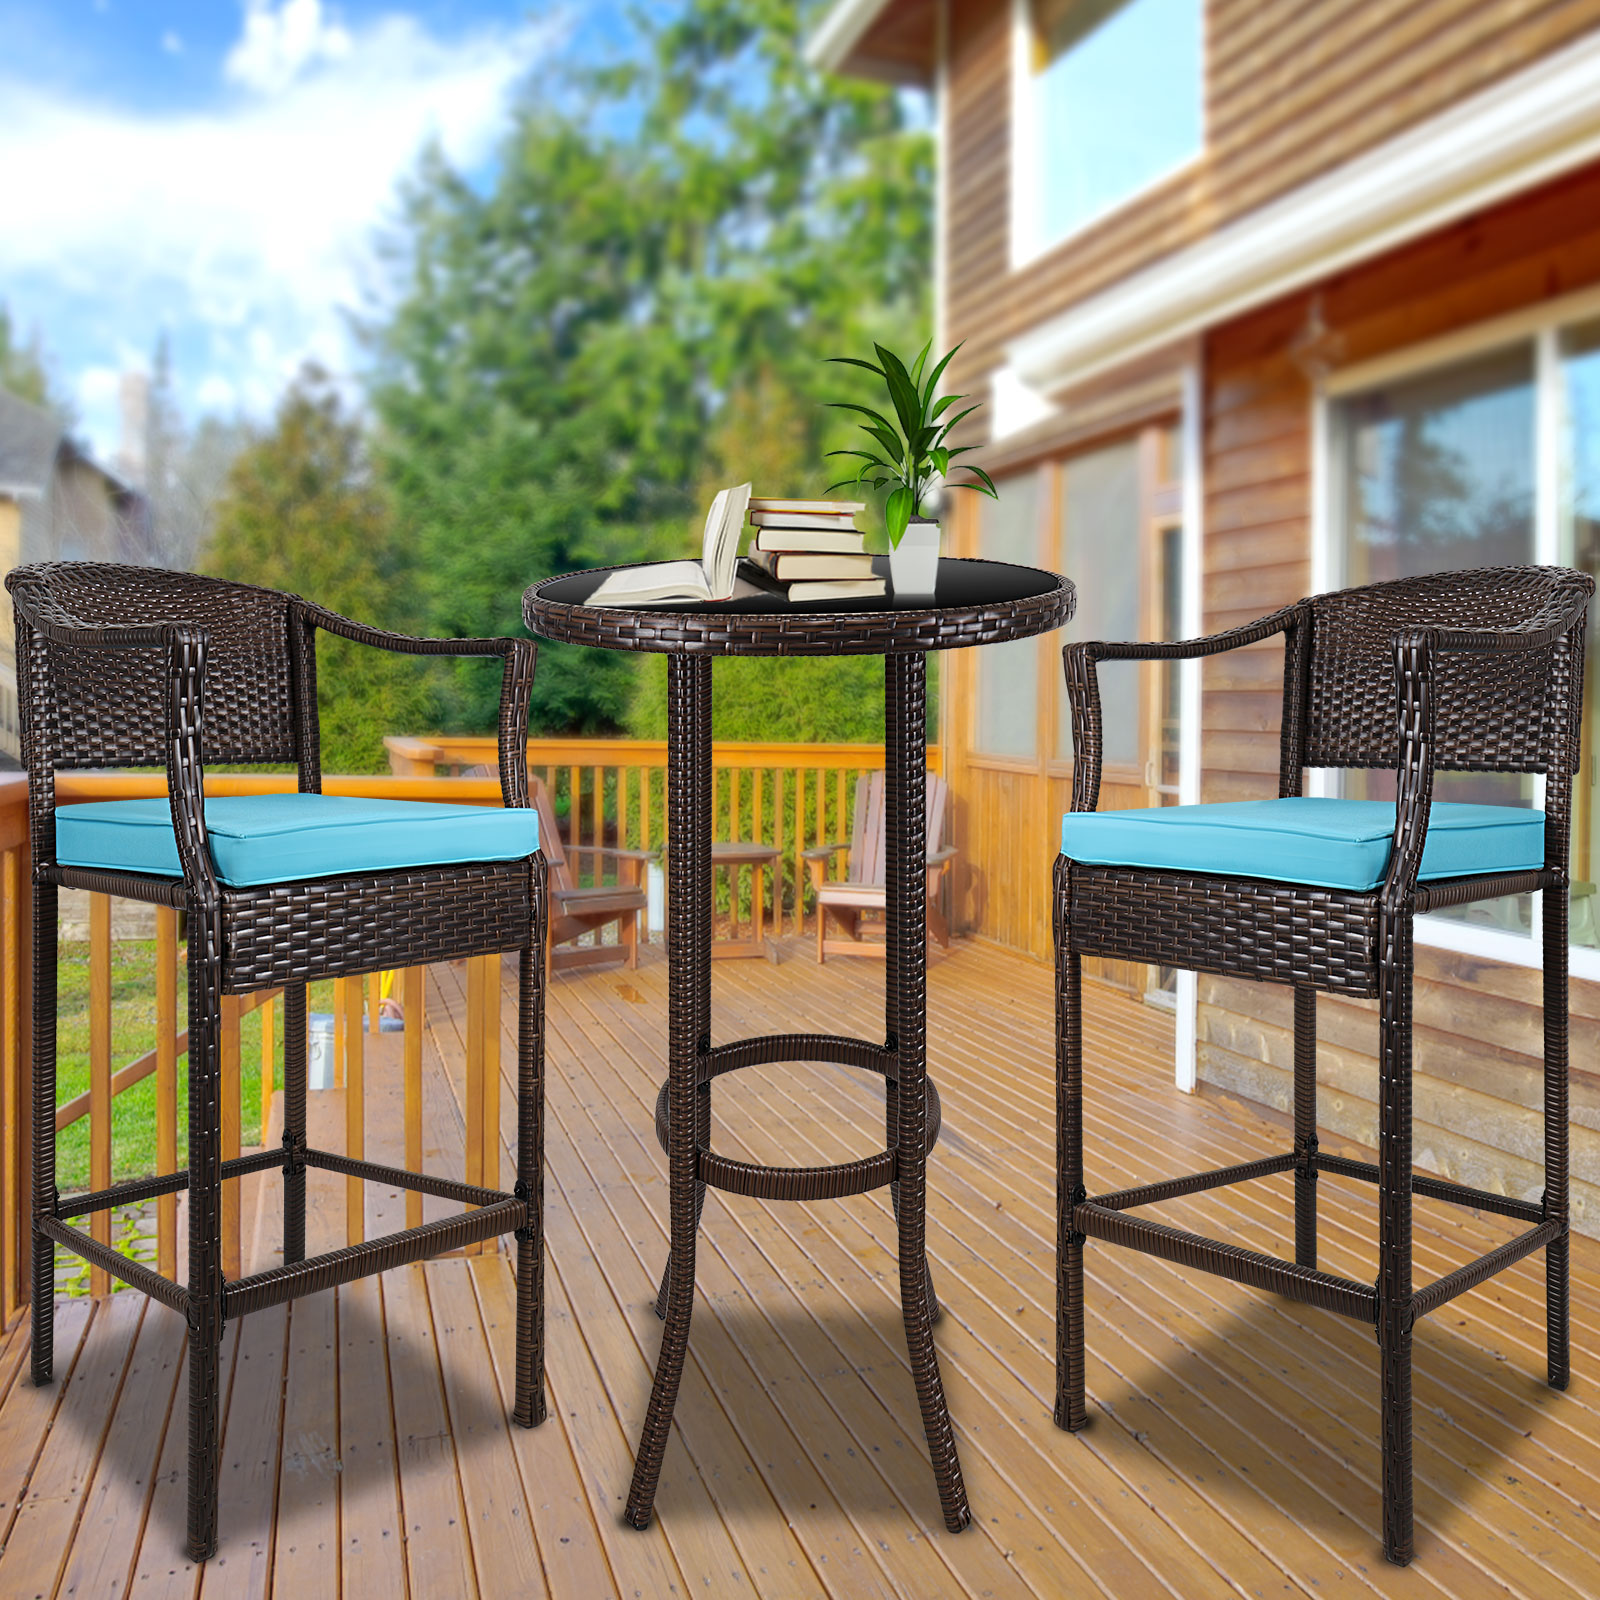 3 Piece Patio Height Bar Set with Table and Chairs, Outdoor Bistro Set, 27.56" Bistro Dining Table and 2 Cushioned Chairs, Patio Furniture Sets Suitable for Yard, Balcony, Garden, and Pool, B15 - image 2 of 10